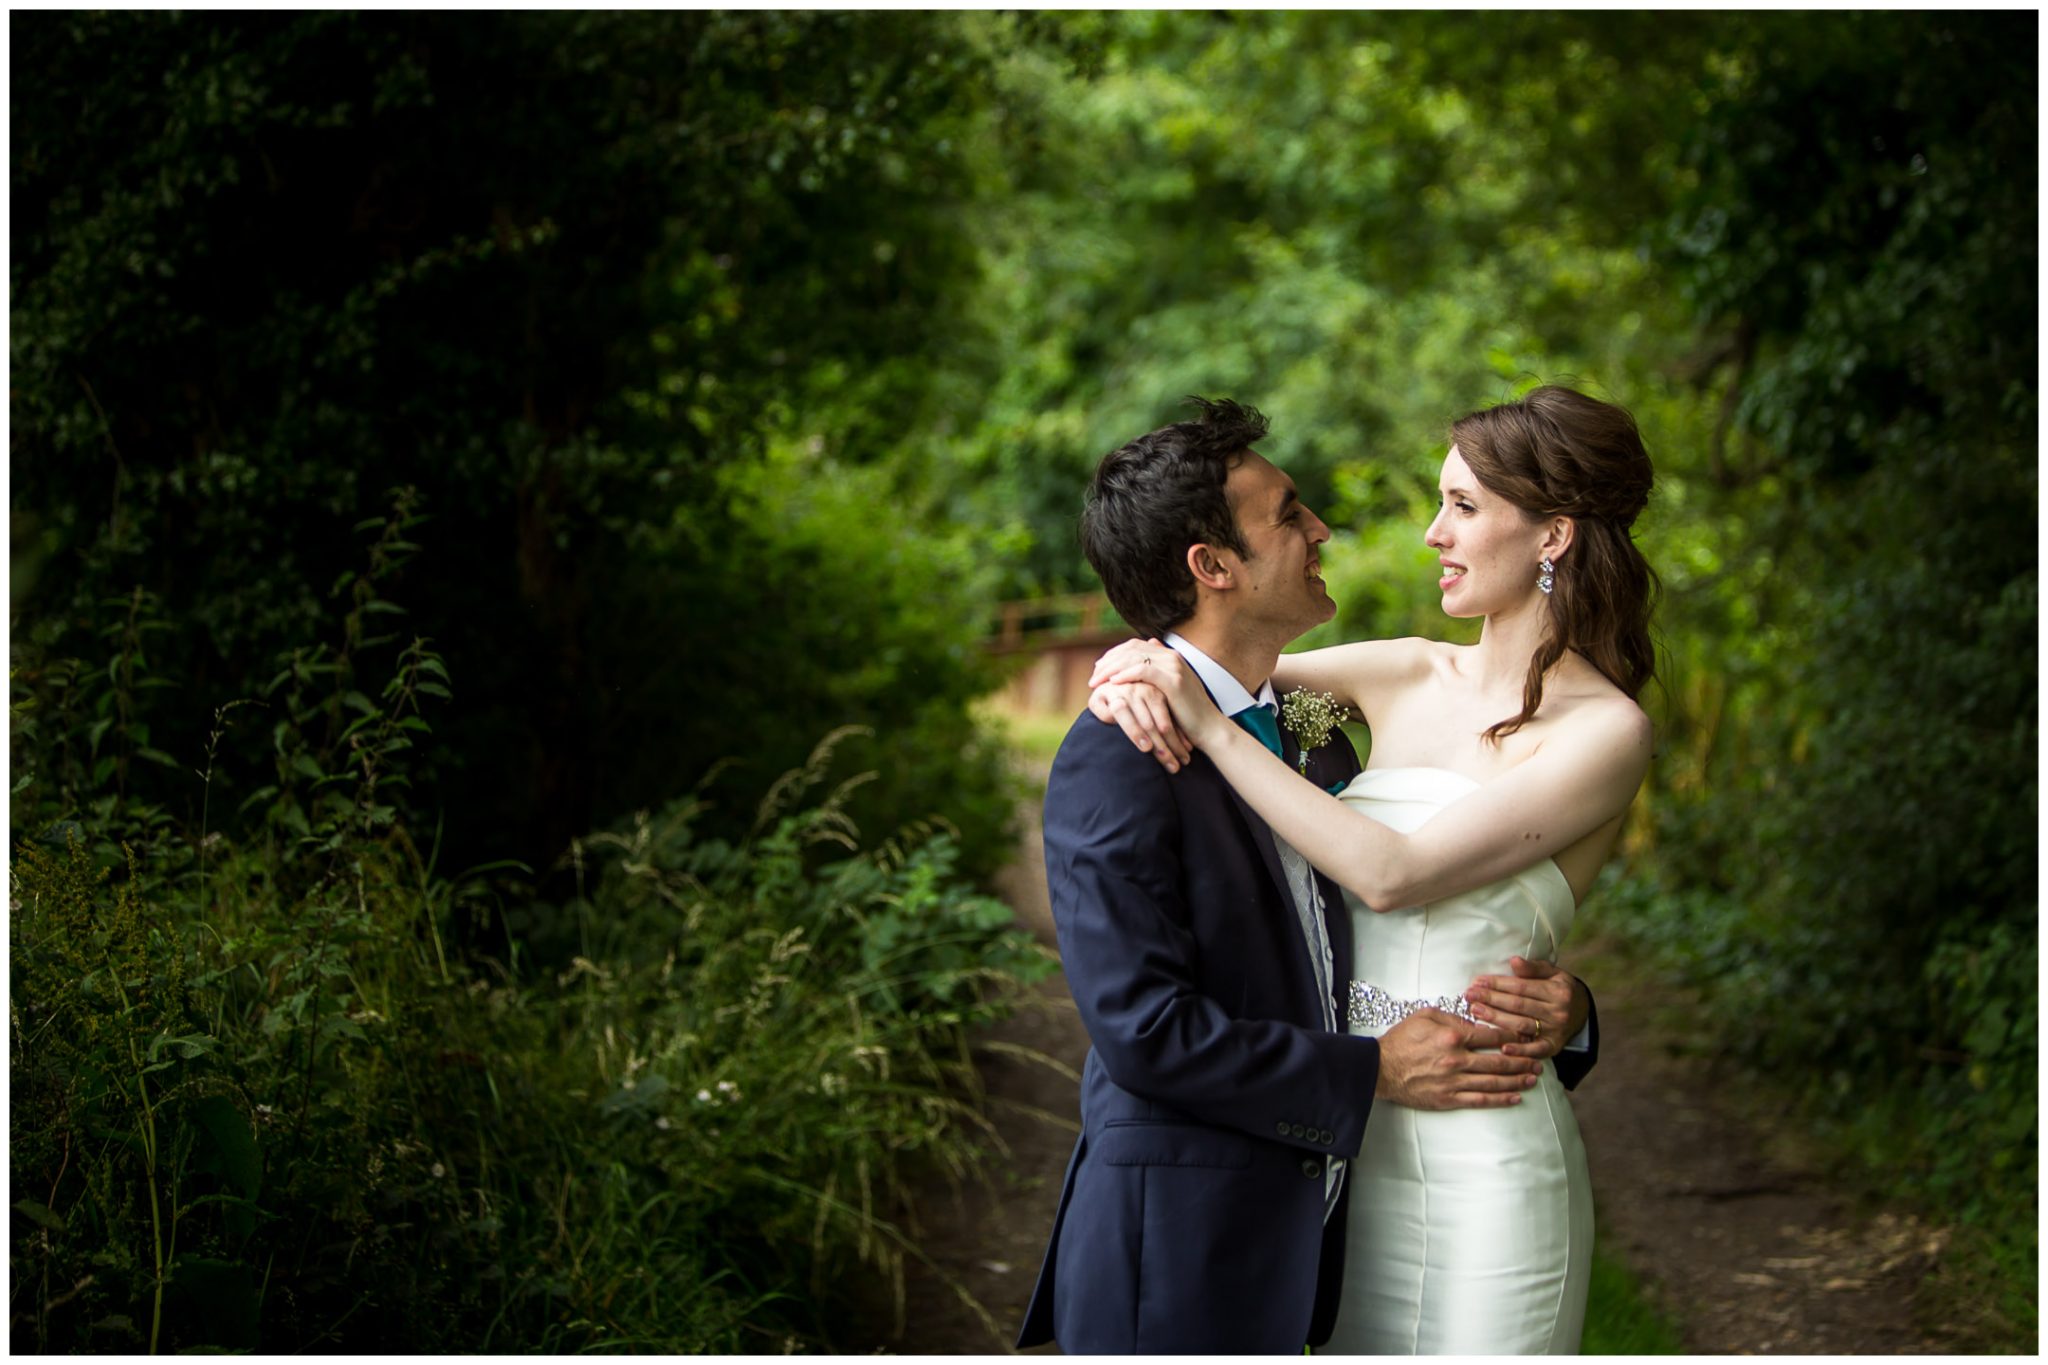 Sopley Mill Summer wedding couple portrait in natural light